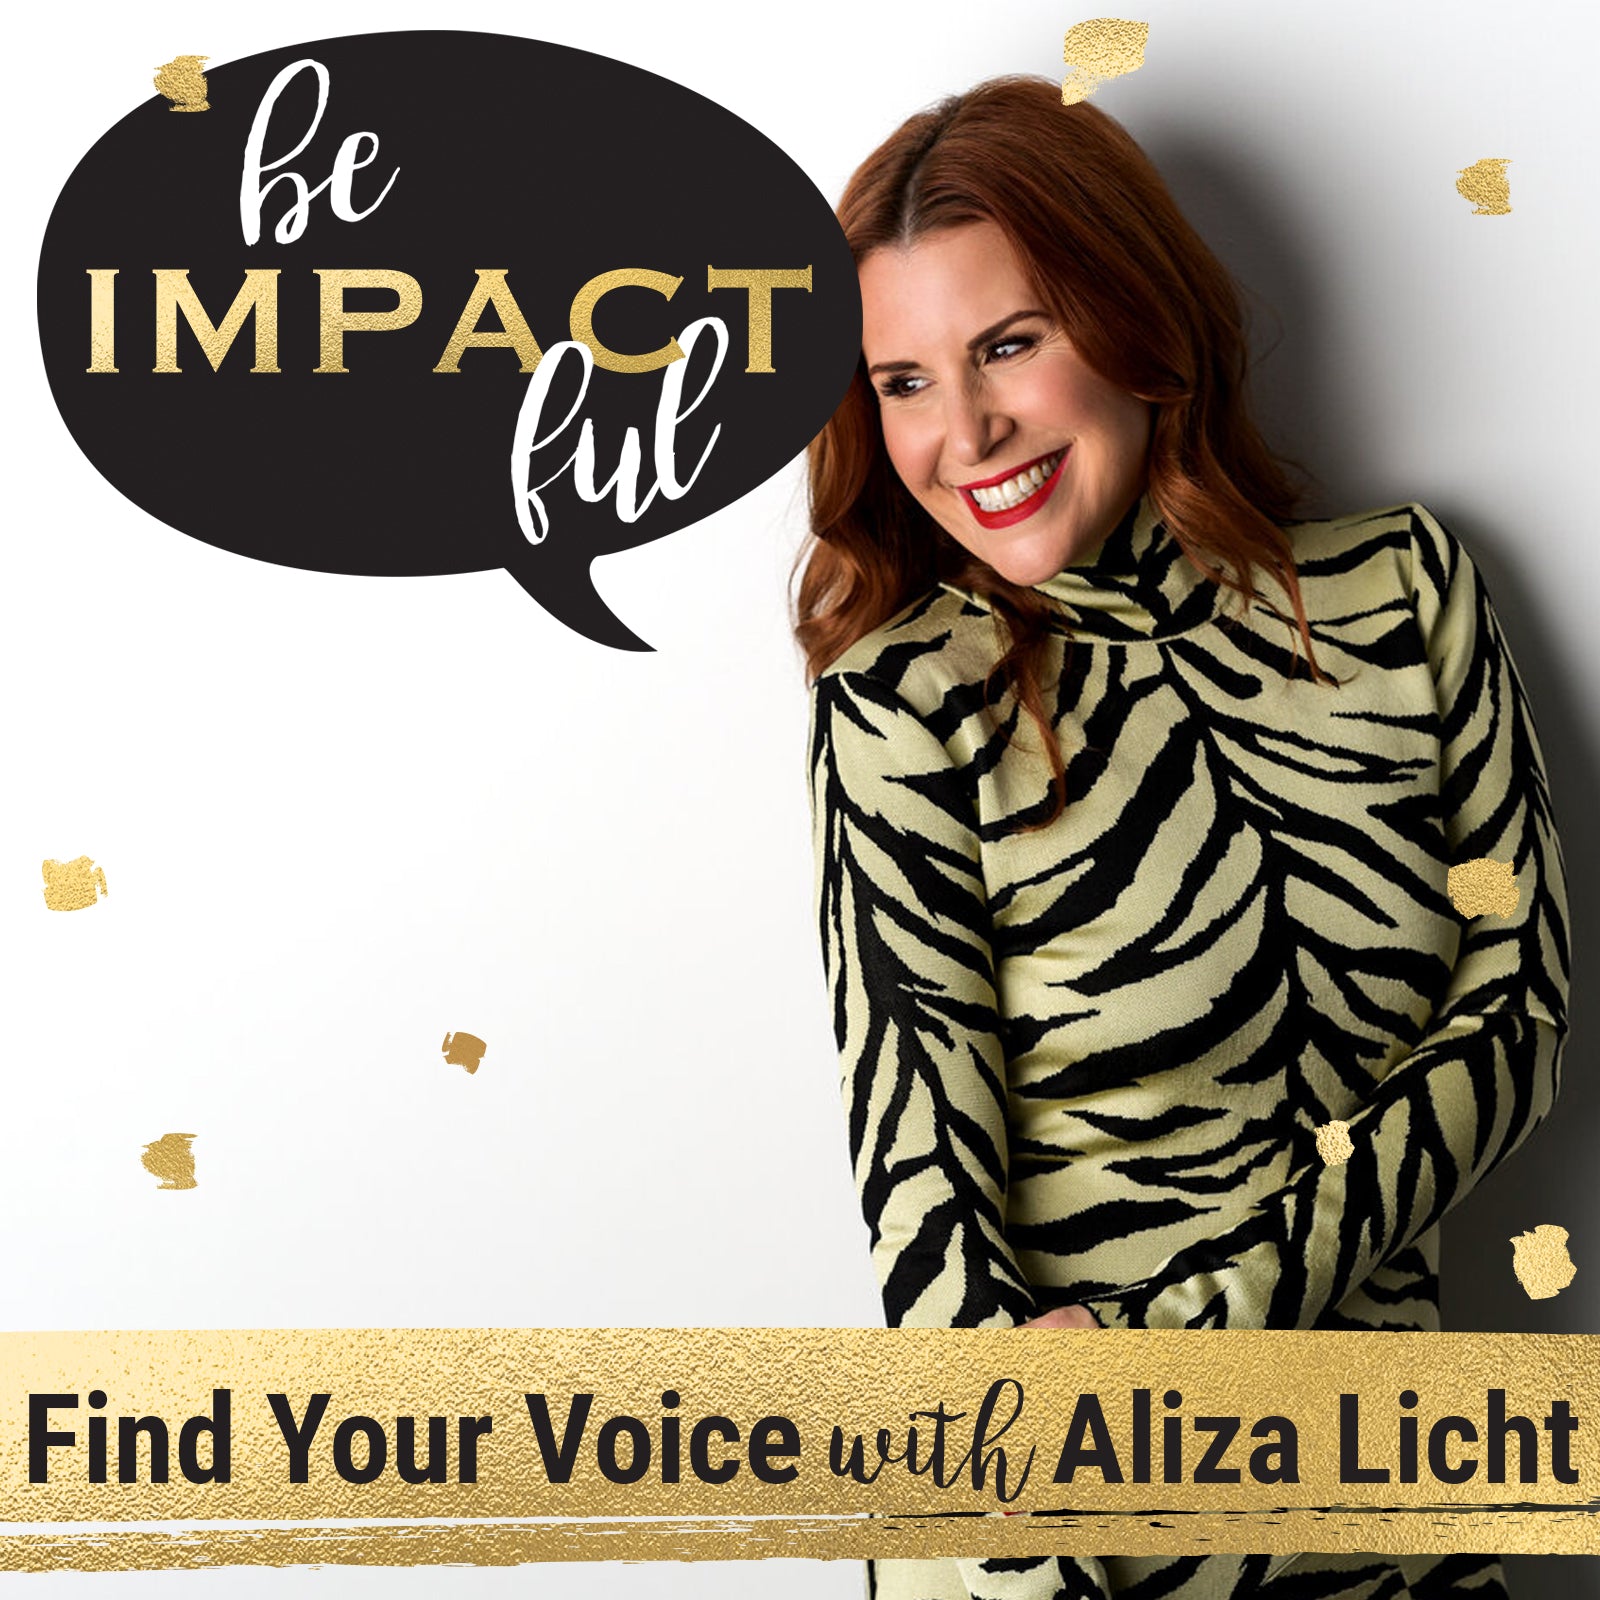 Find Your Voice with Aliza Licht